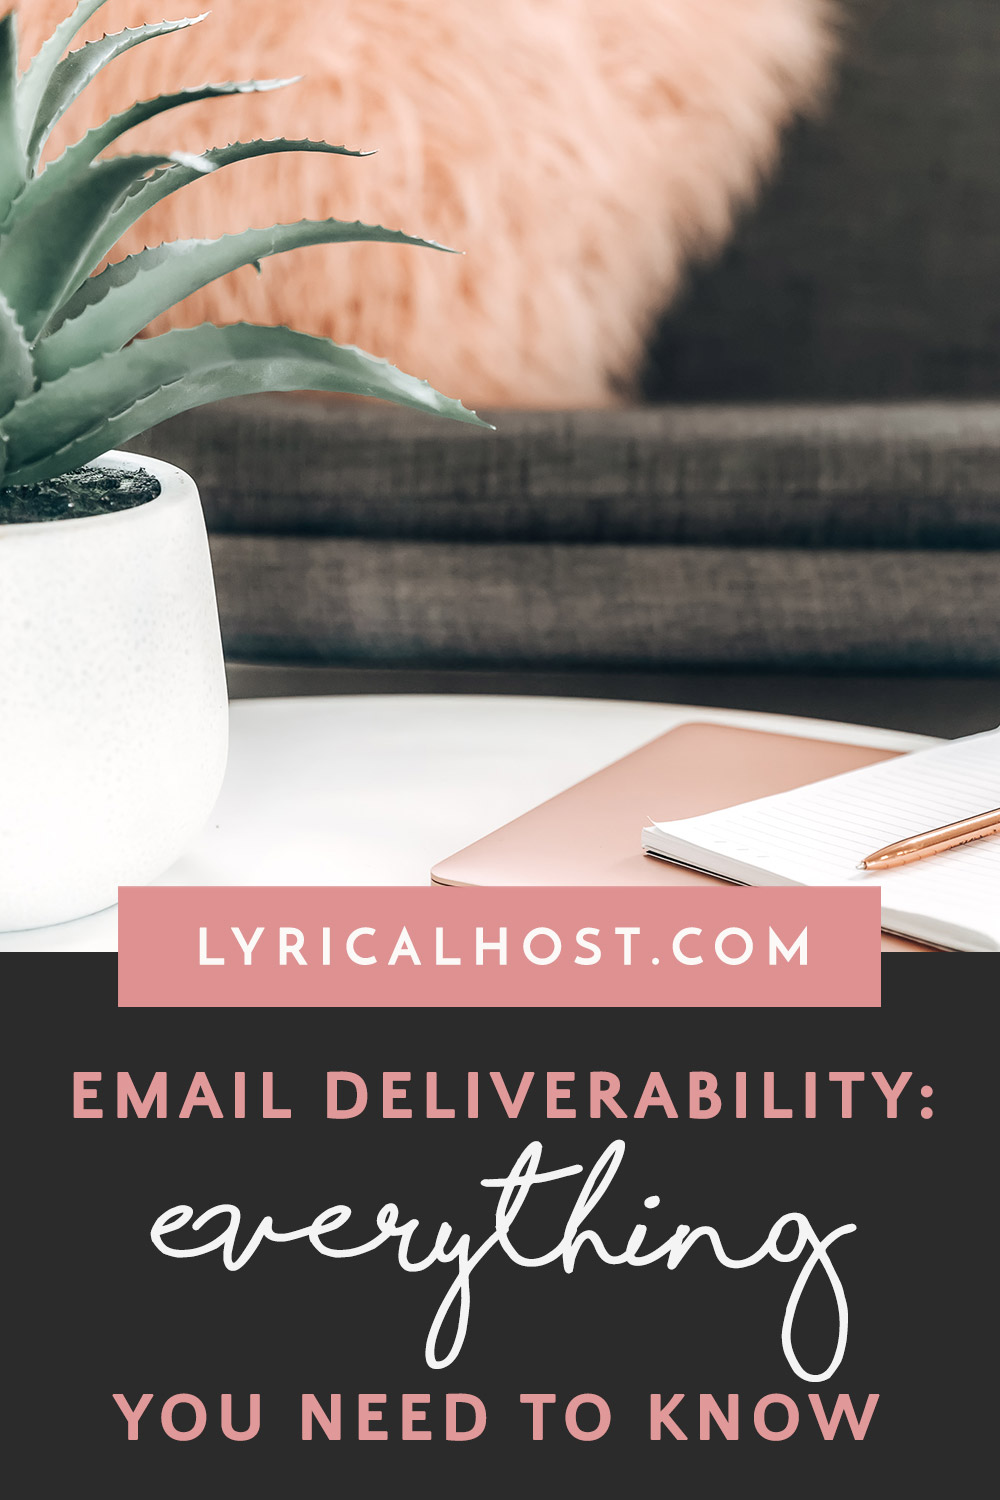 Everything you need to know about email deliverability